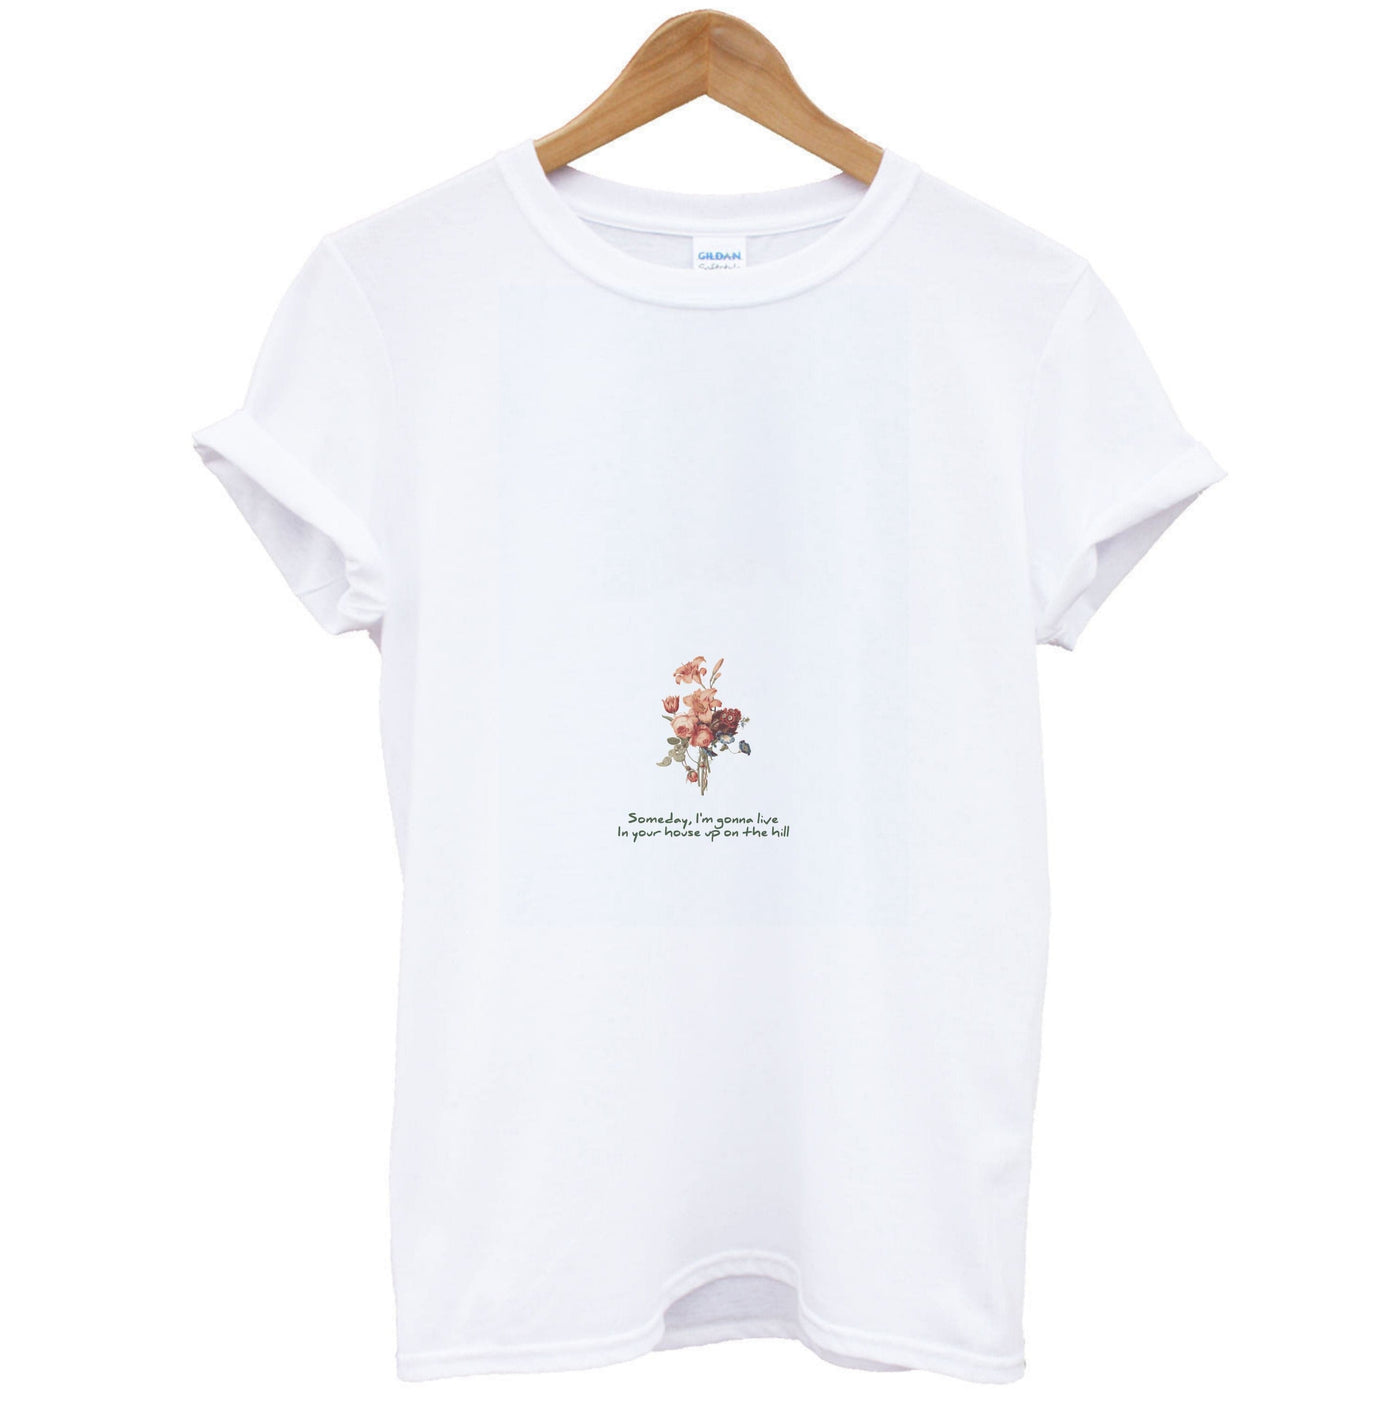 House Up On The Hill - Phoebe Bridgers T-Shirt